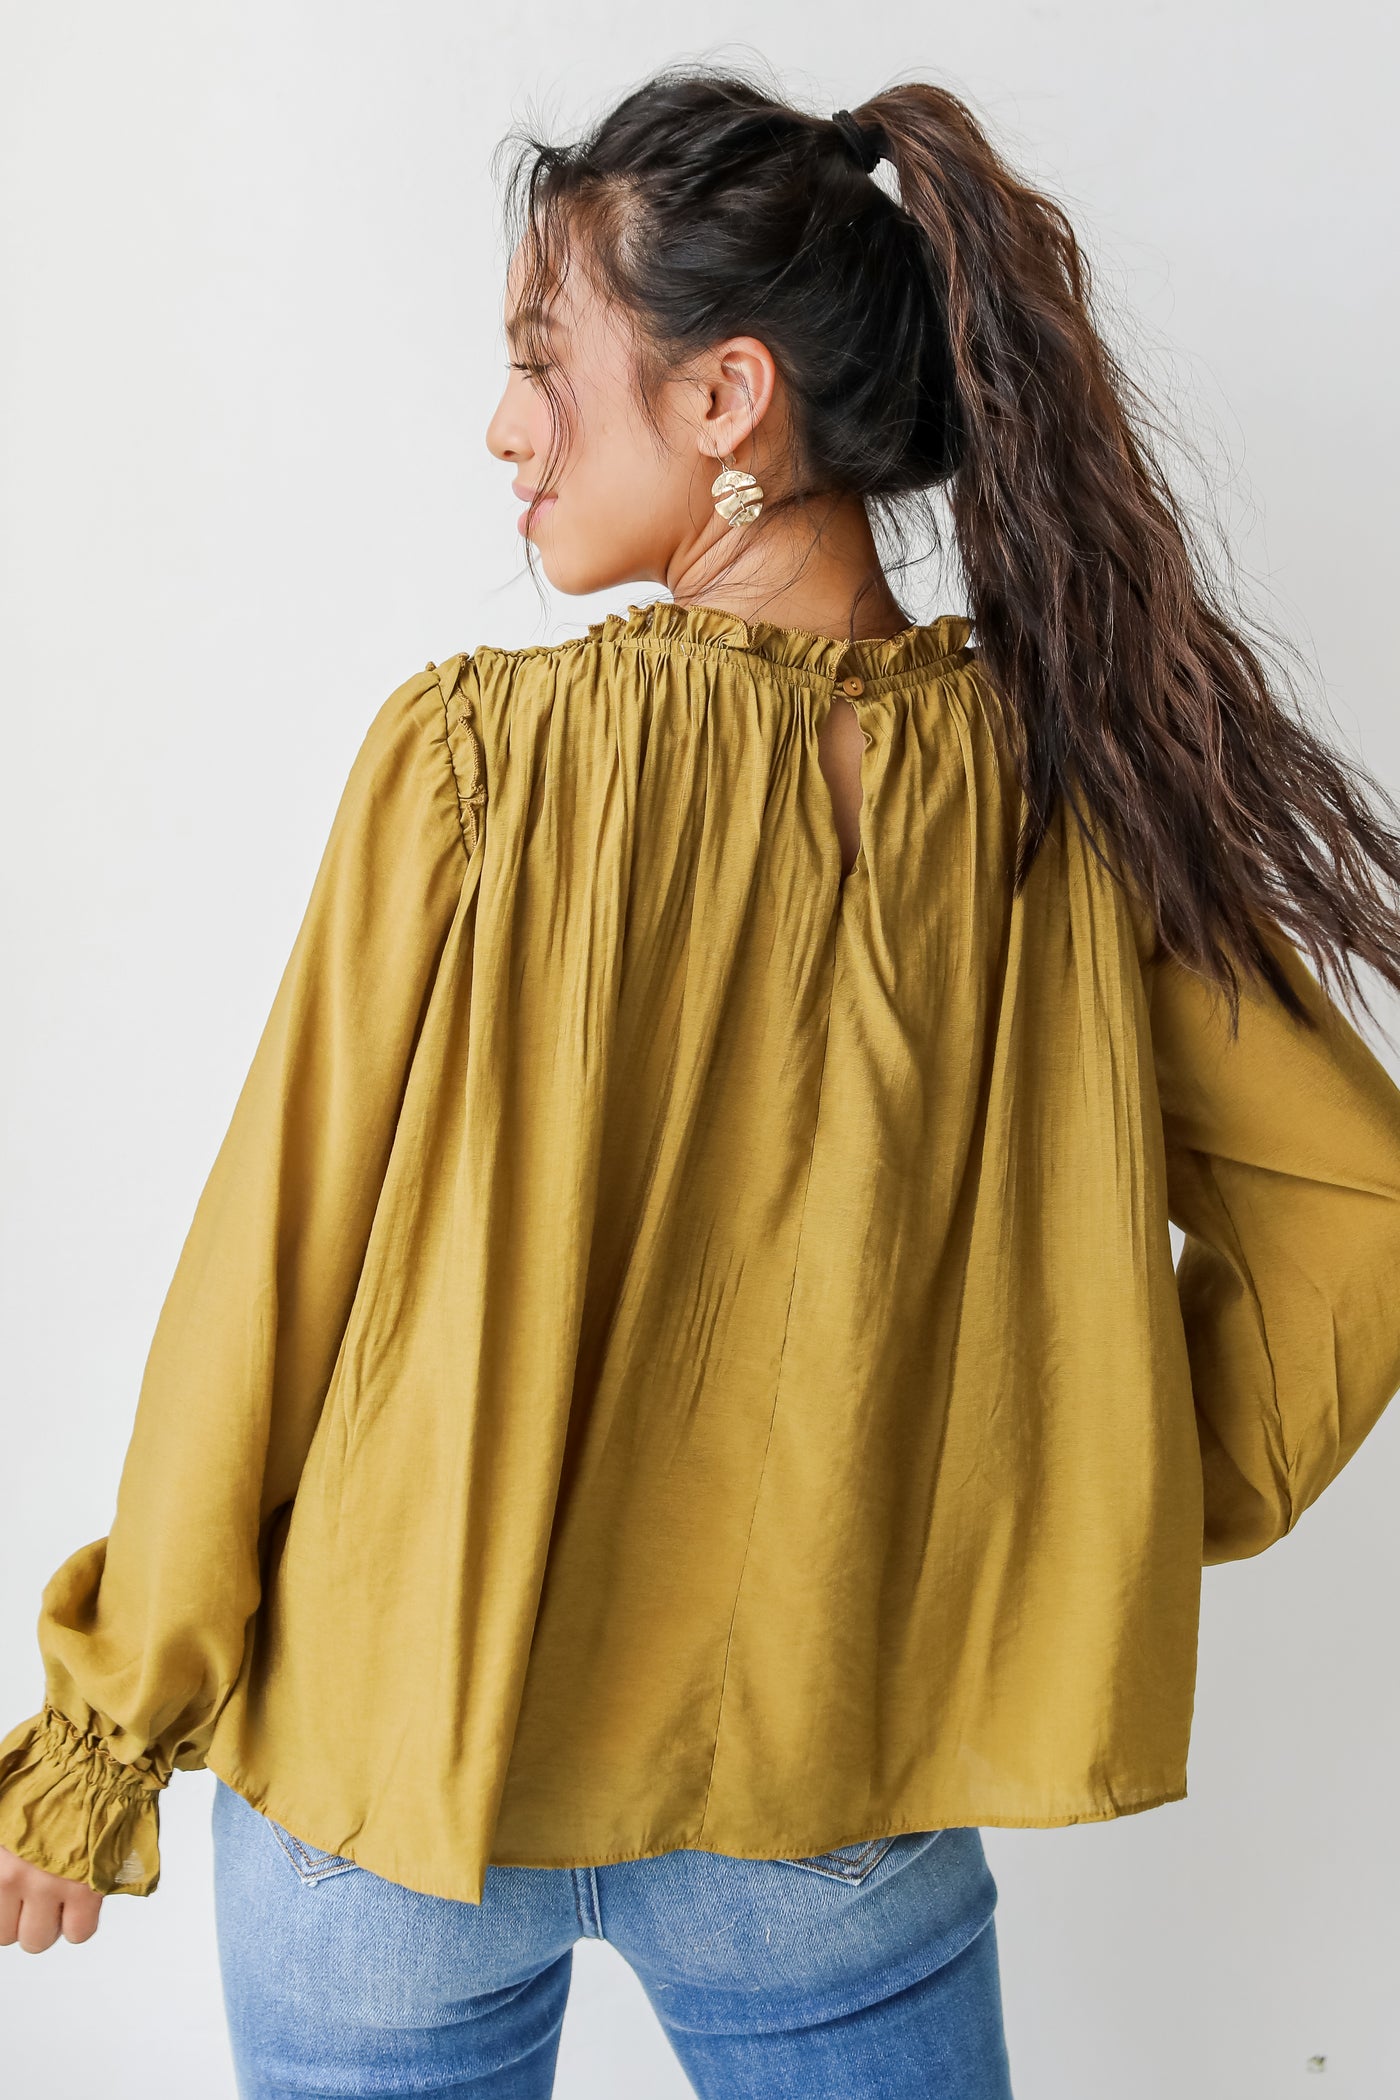 Blouse in mustard back view